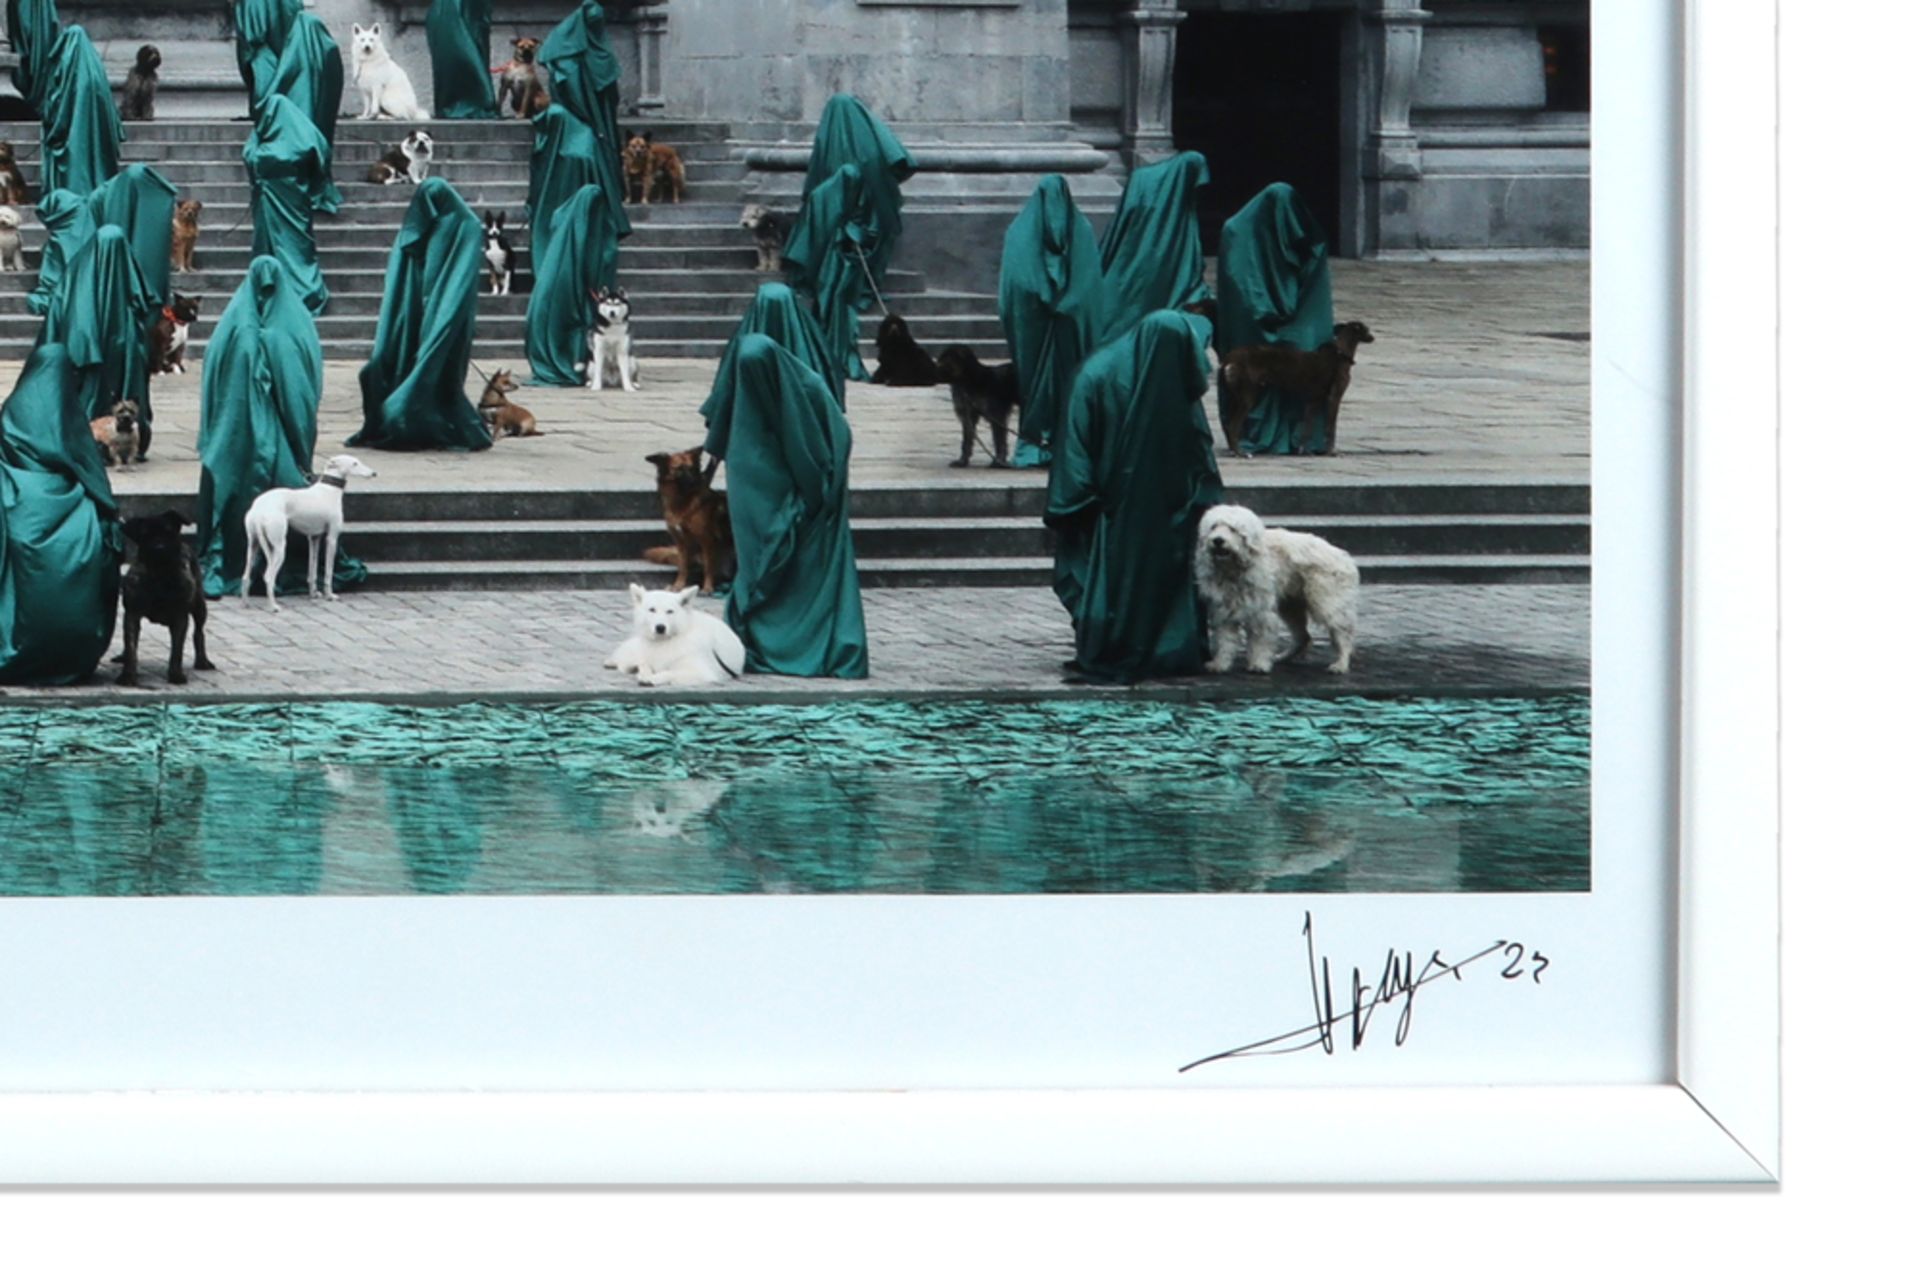 Vincent Lagrange photoprint in colors made in honor of 'The World Animals Day's dated (20)23 || - Image 2 of 3